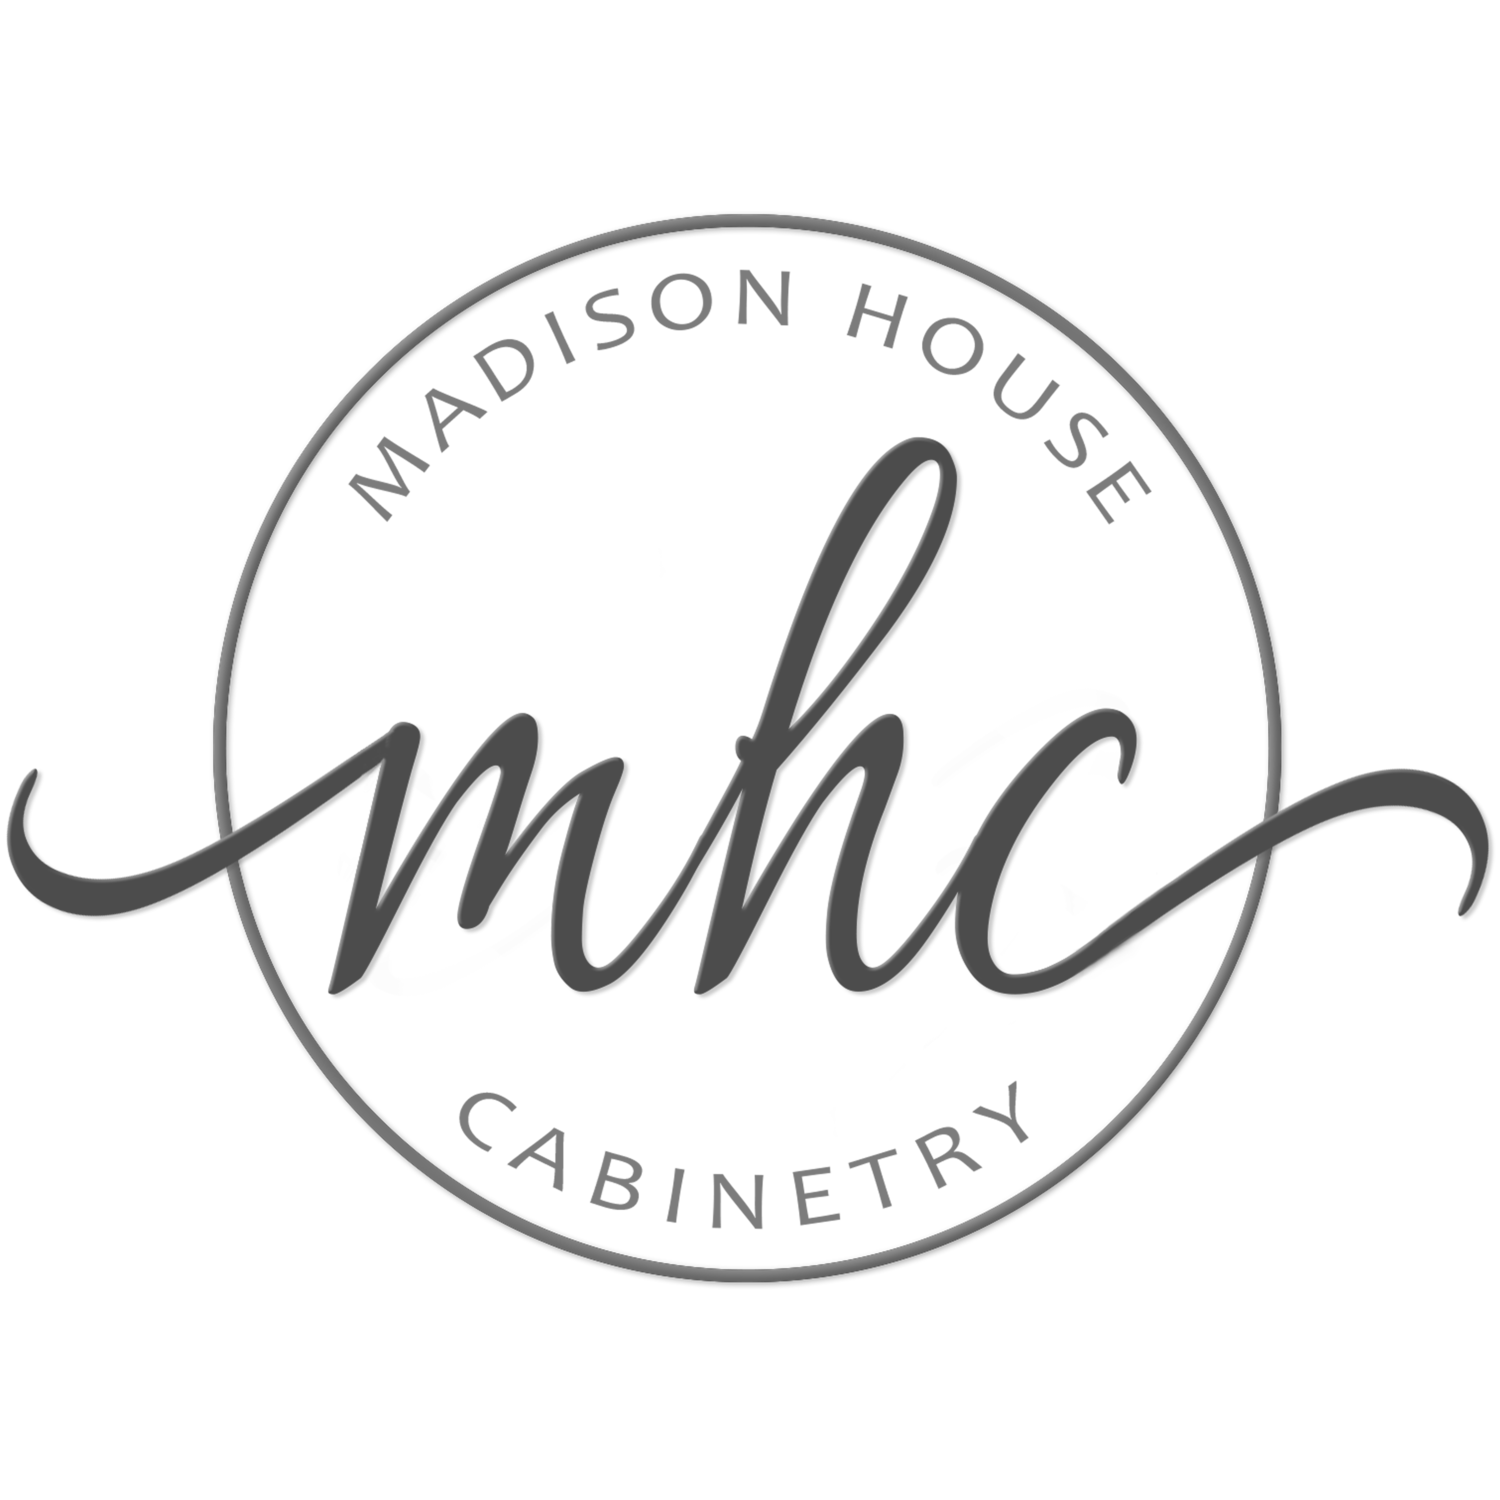 Madison House Cabinetry